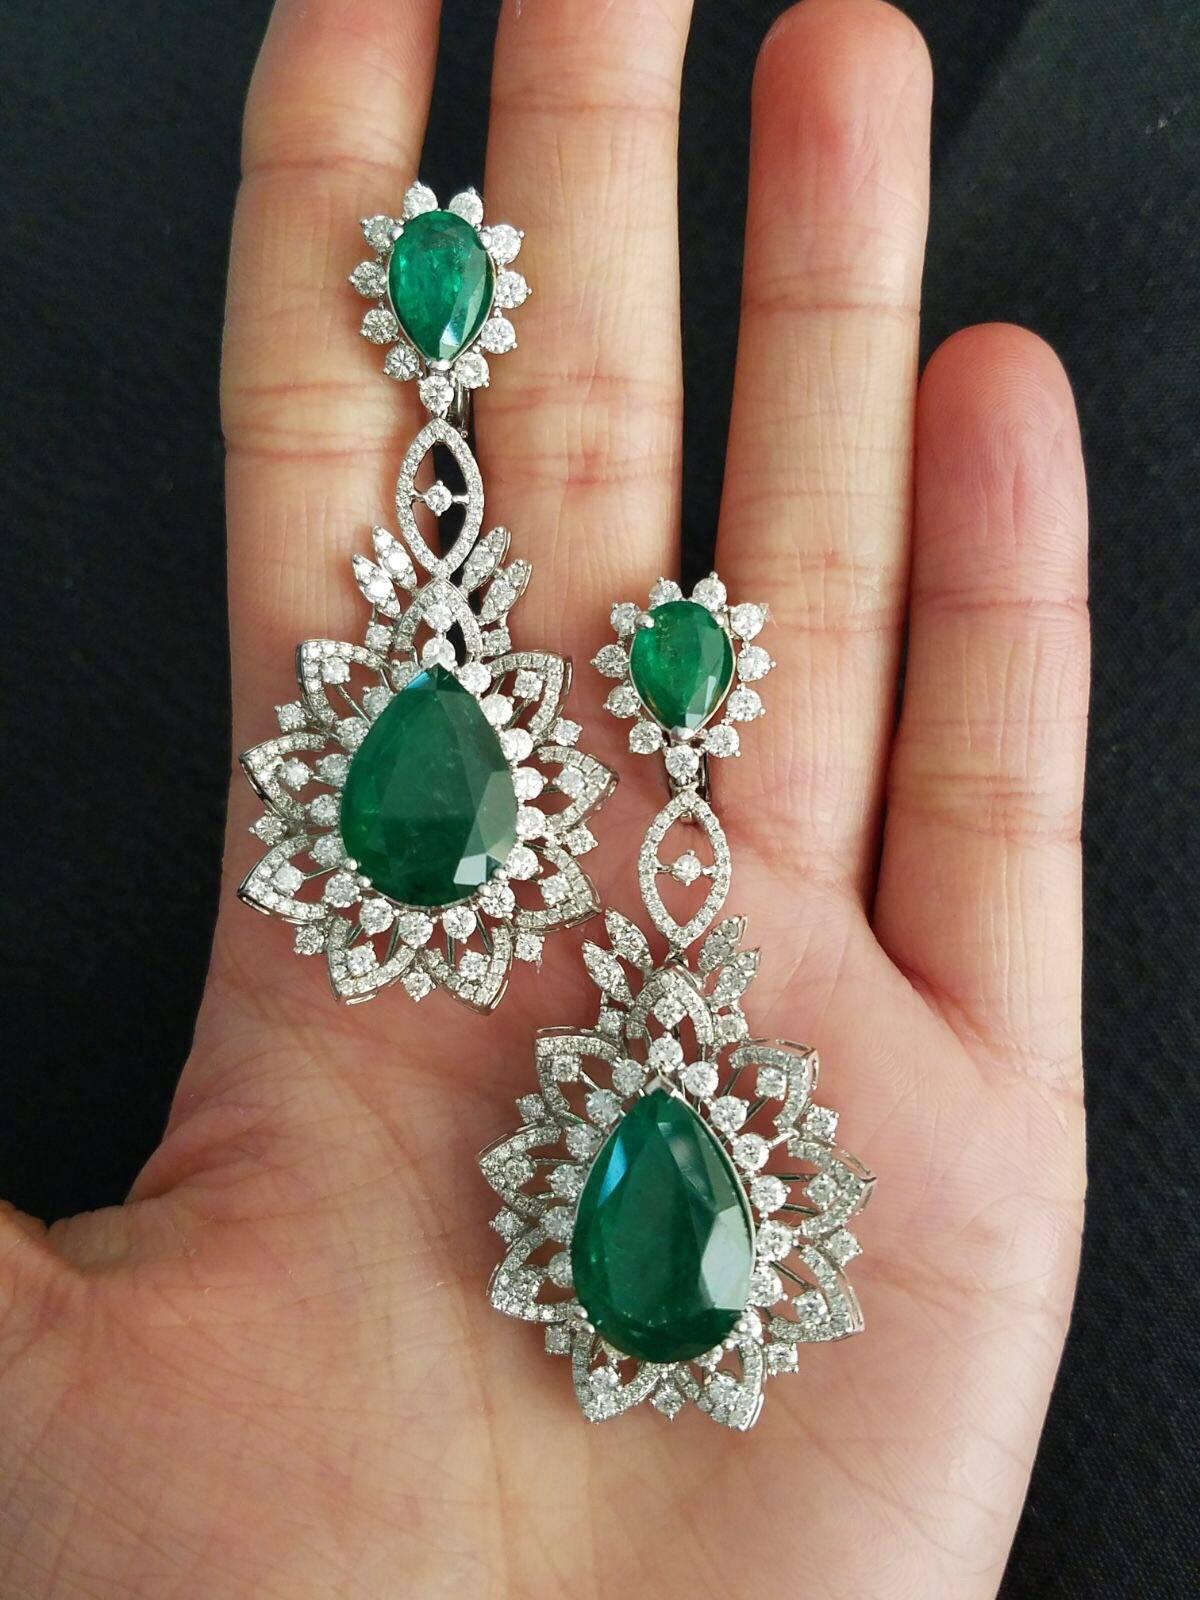 A statement pair of 26.64 carats Zambian Emerald pear shape earrings, of great quality and colour set in 18K White Gold with White Diamonds. 

Stone Detail:
Stone: Zambian Emerald 
Total Weight: 26.64 carat

Diamond Detail:
Total Weight: 6.68